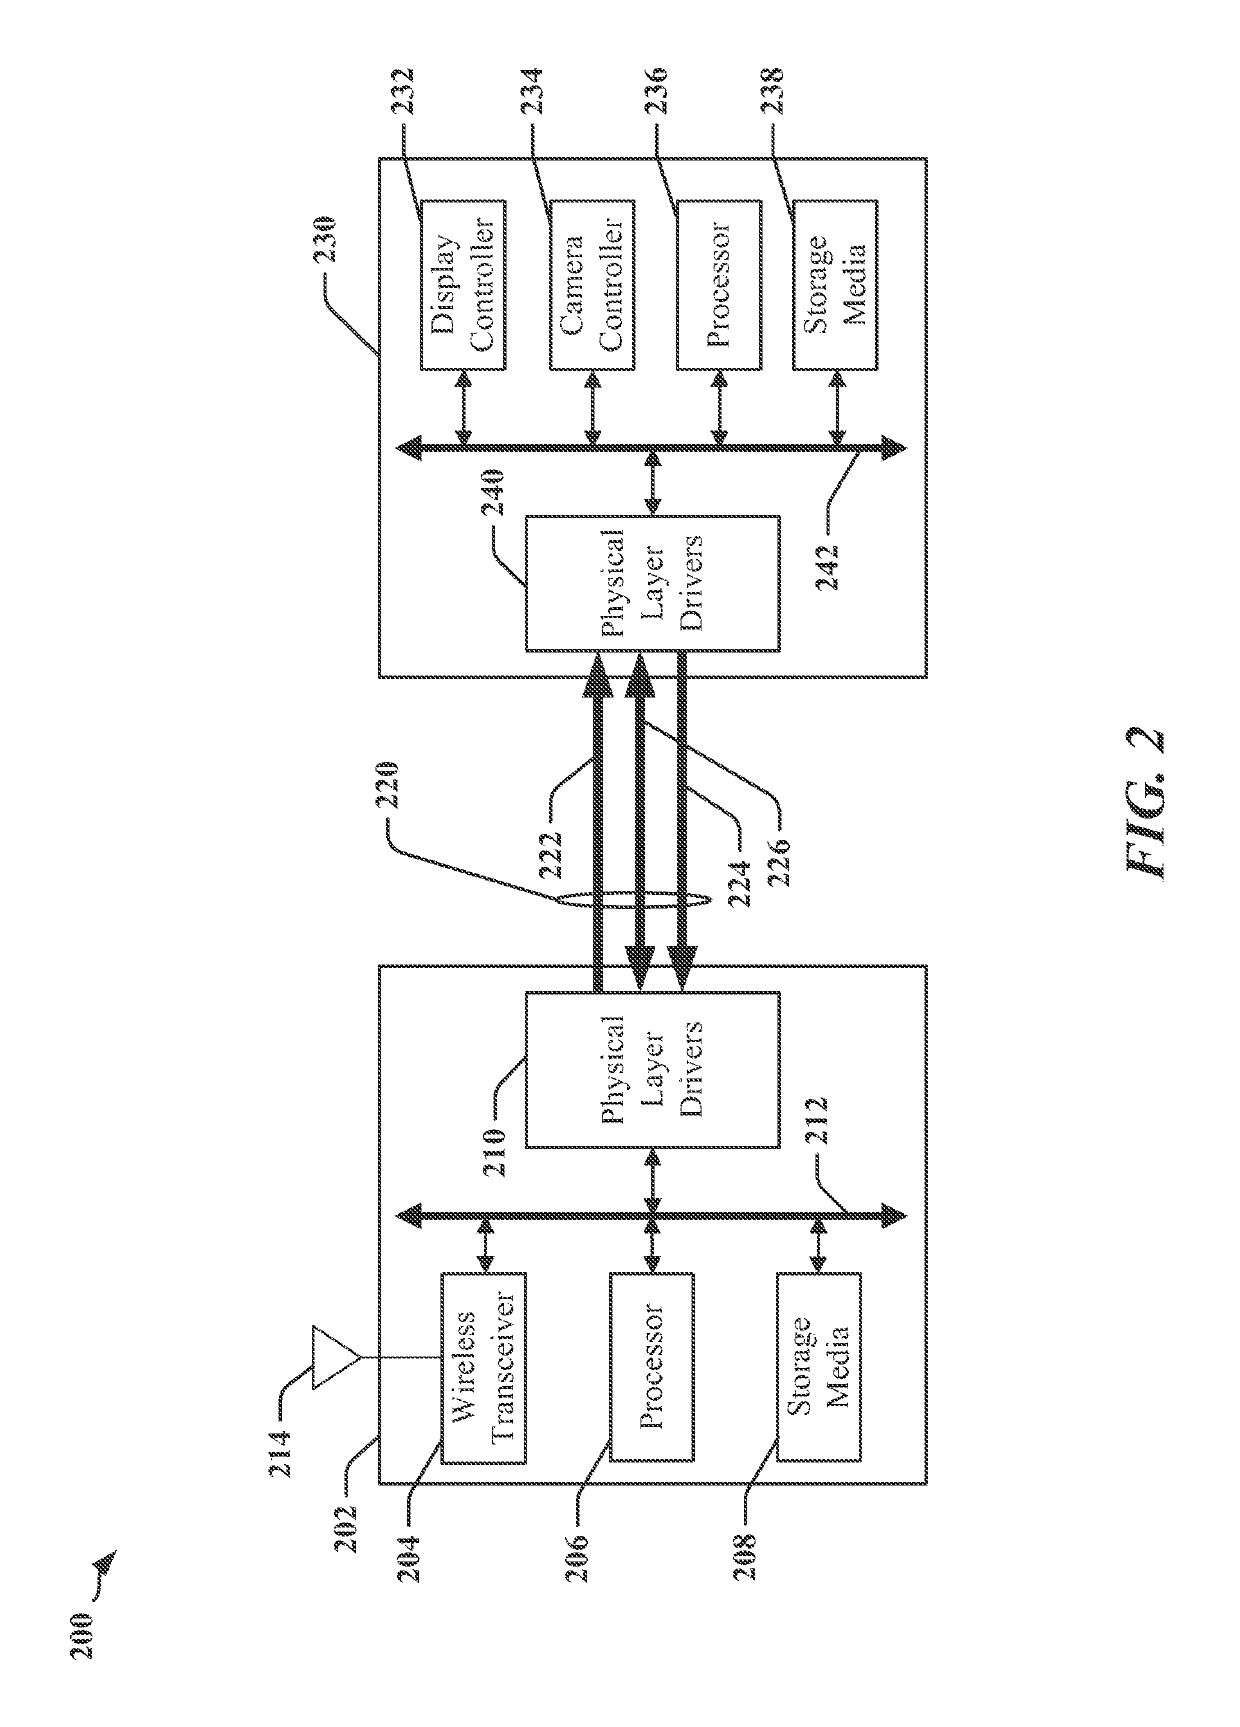 Calibration pattern and duty-cycle distortion correction for clock data recovery in a multi-wire, multi-phase interface